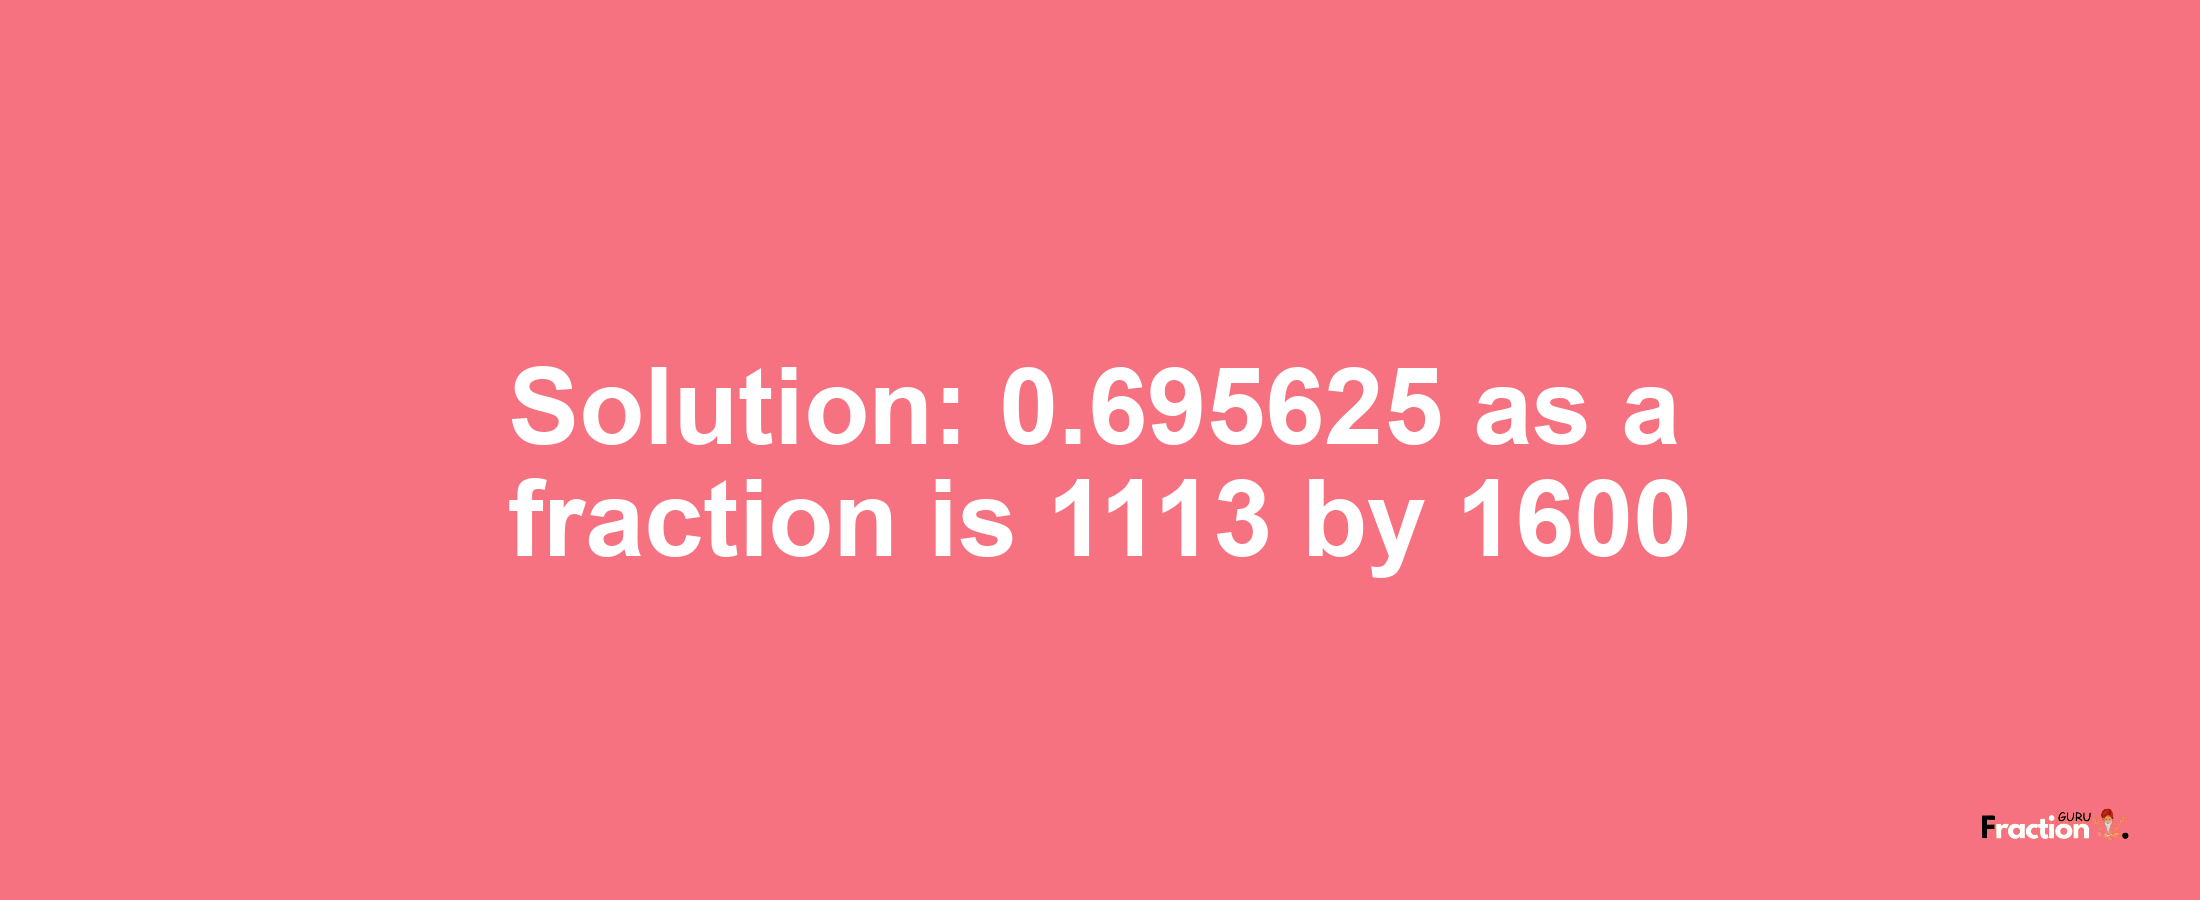 Solution:0.695625 as a fraction is 1113/1600